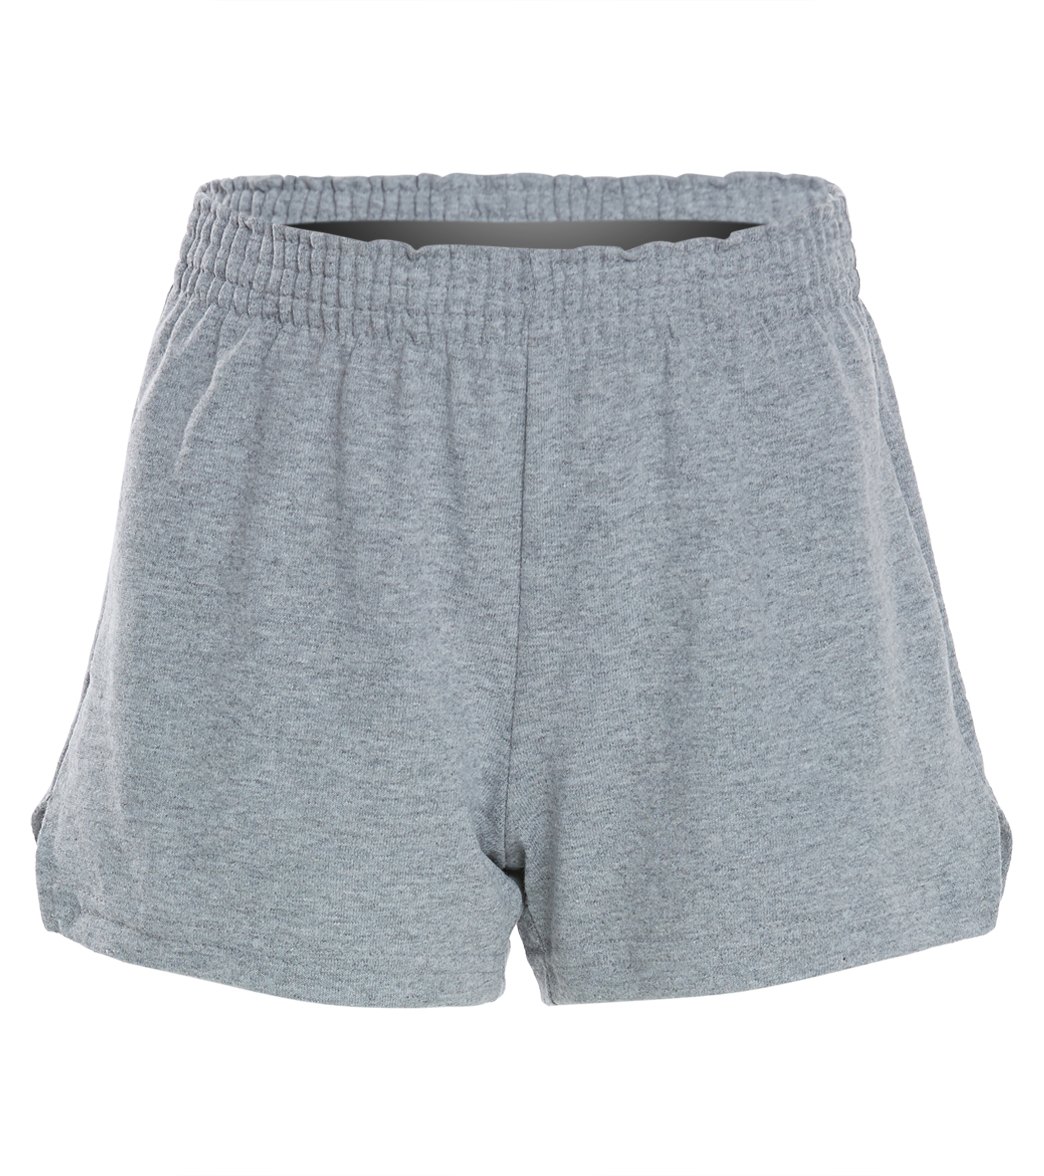 Girls' Fitted Jersey Short - Grey X-Small Cotton/Polyester - Swimoutlet.com